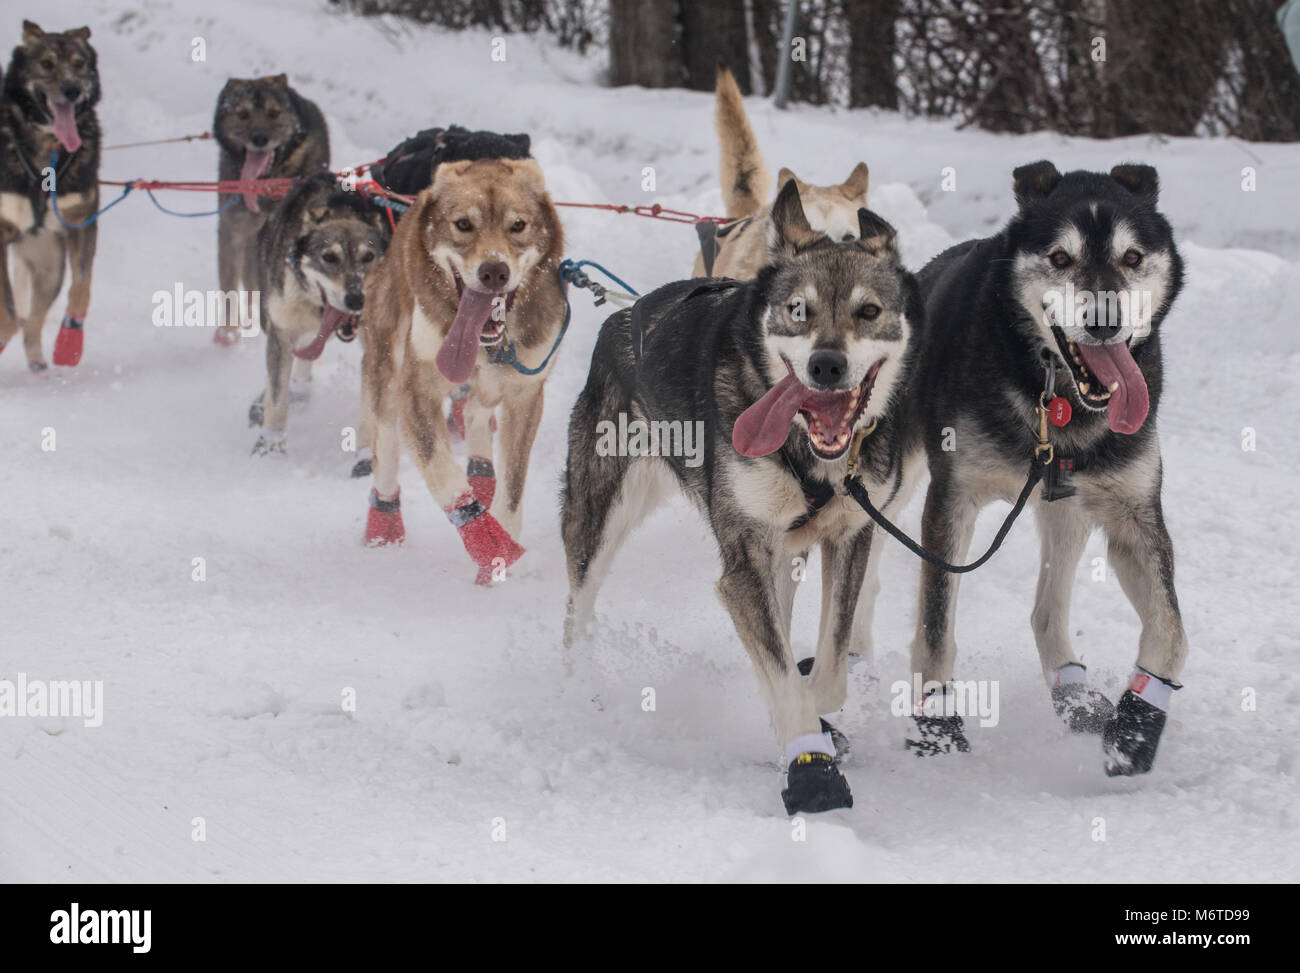 Sixty-seven mushers kicked off the 46th Annual Iditarod Trail Sled Dog Race with an 11-mile ceremonial start through Anchorage, Alaska, March 3, 2018. “The Last Great Race on Earth” throws 1,000 miles of Alaska’s jagged mountain ranges, frozen rivers, dense forests, desolate tundra and miles of windswept coast at the mushers and their dog teams as they set their eyes on the finish line in Nome, on the Bering Sea coast. (U.S. Air Force photo by Senior Airman Curt Beach) Stock Photo